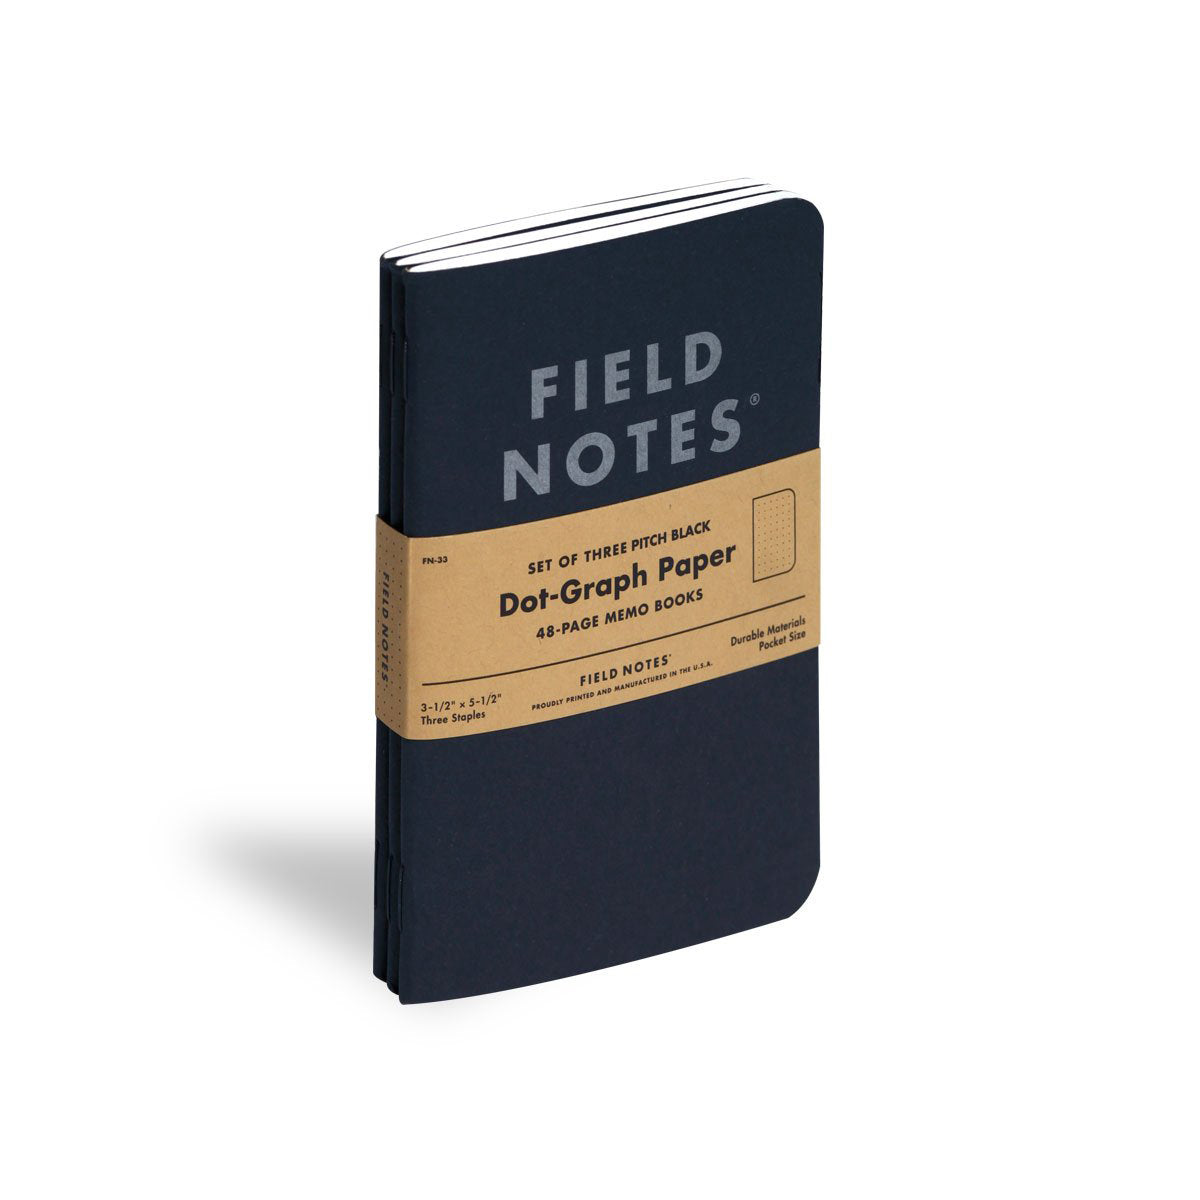 Field Notes Pitch Black 3-Pack Memo Book